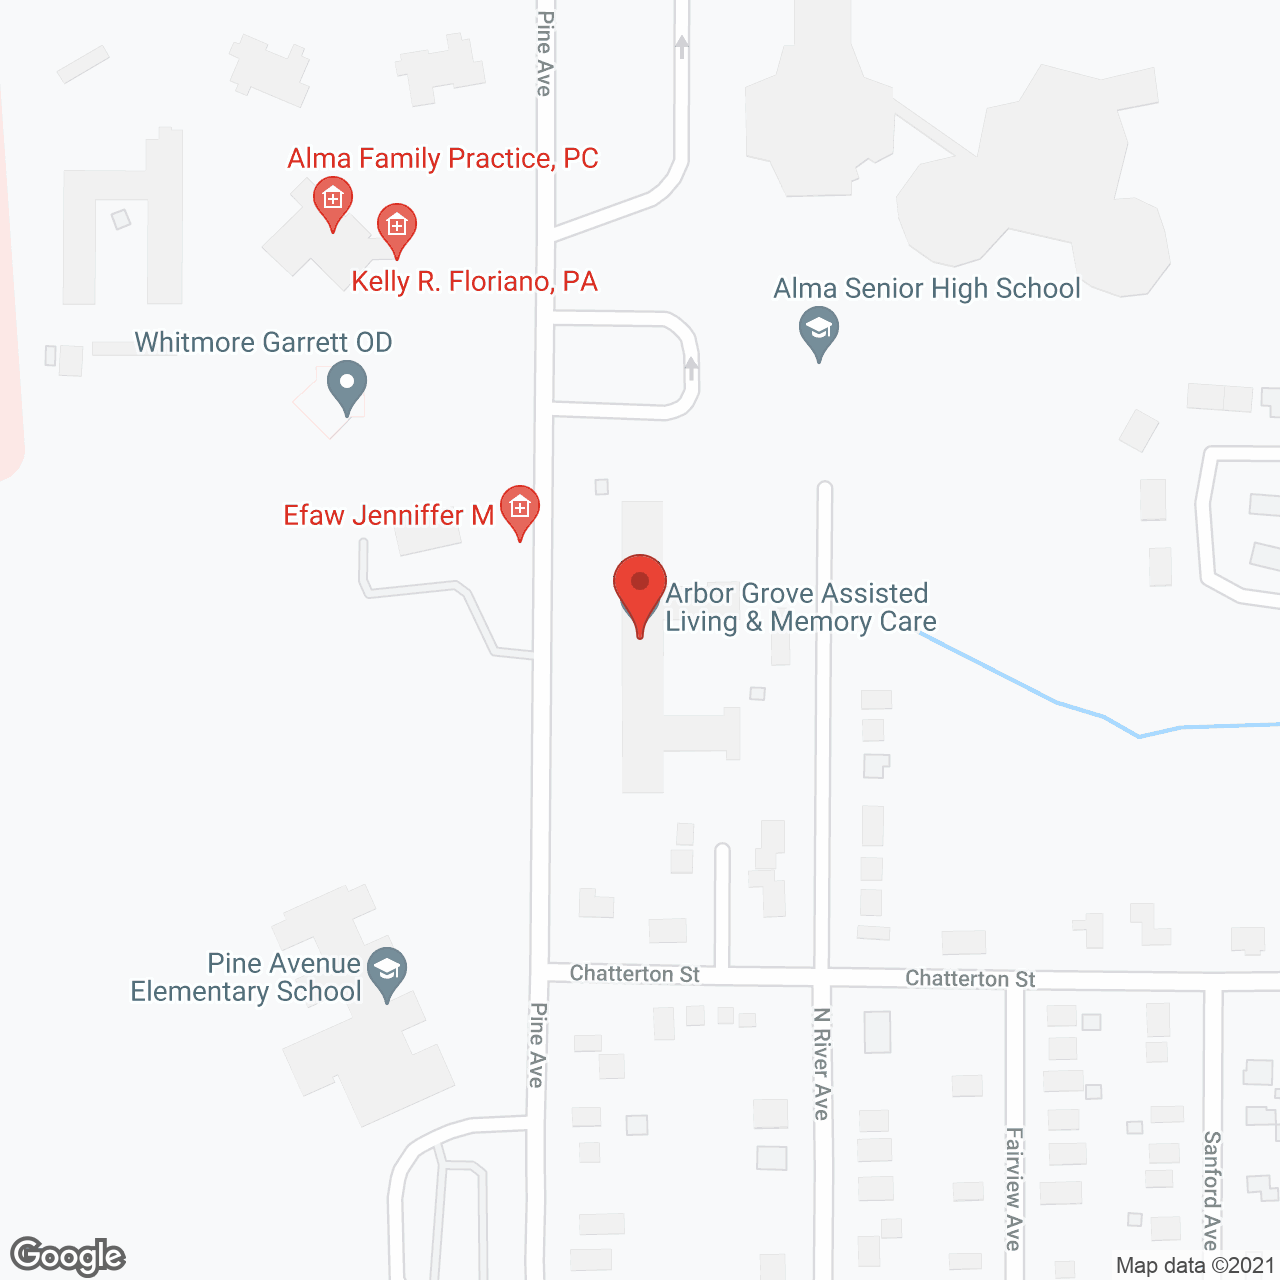 Arbor Grove Assisted Living & Memory Care in google map